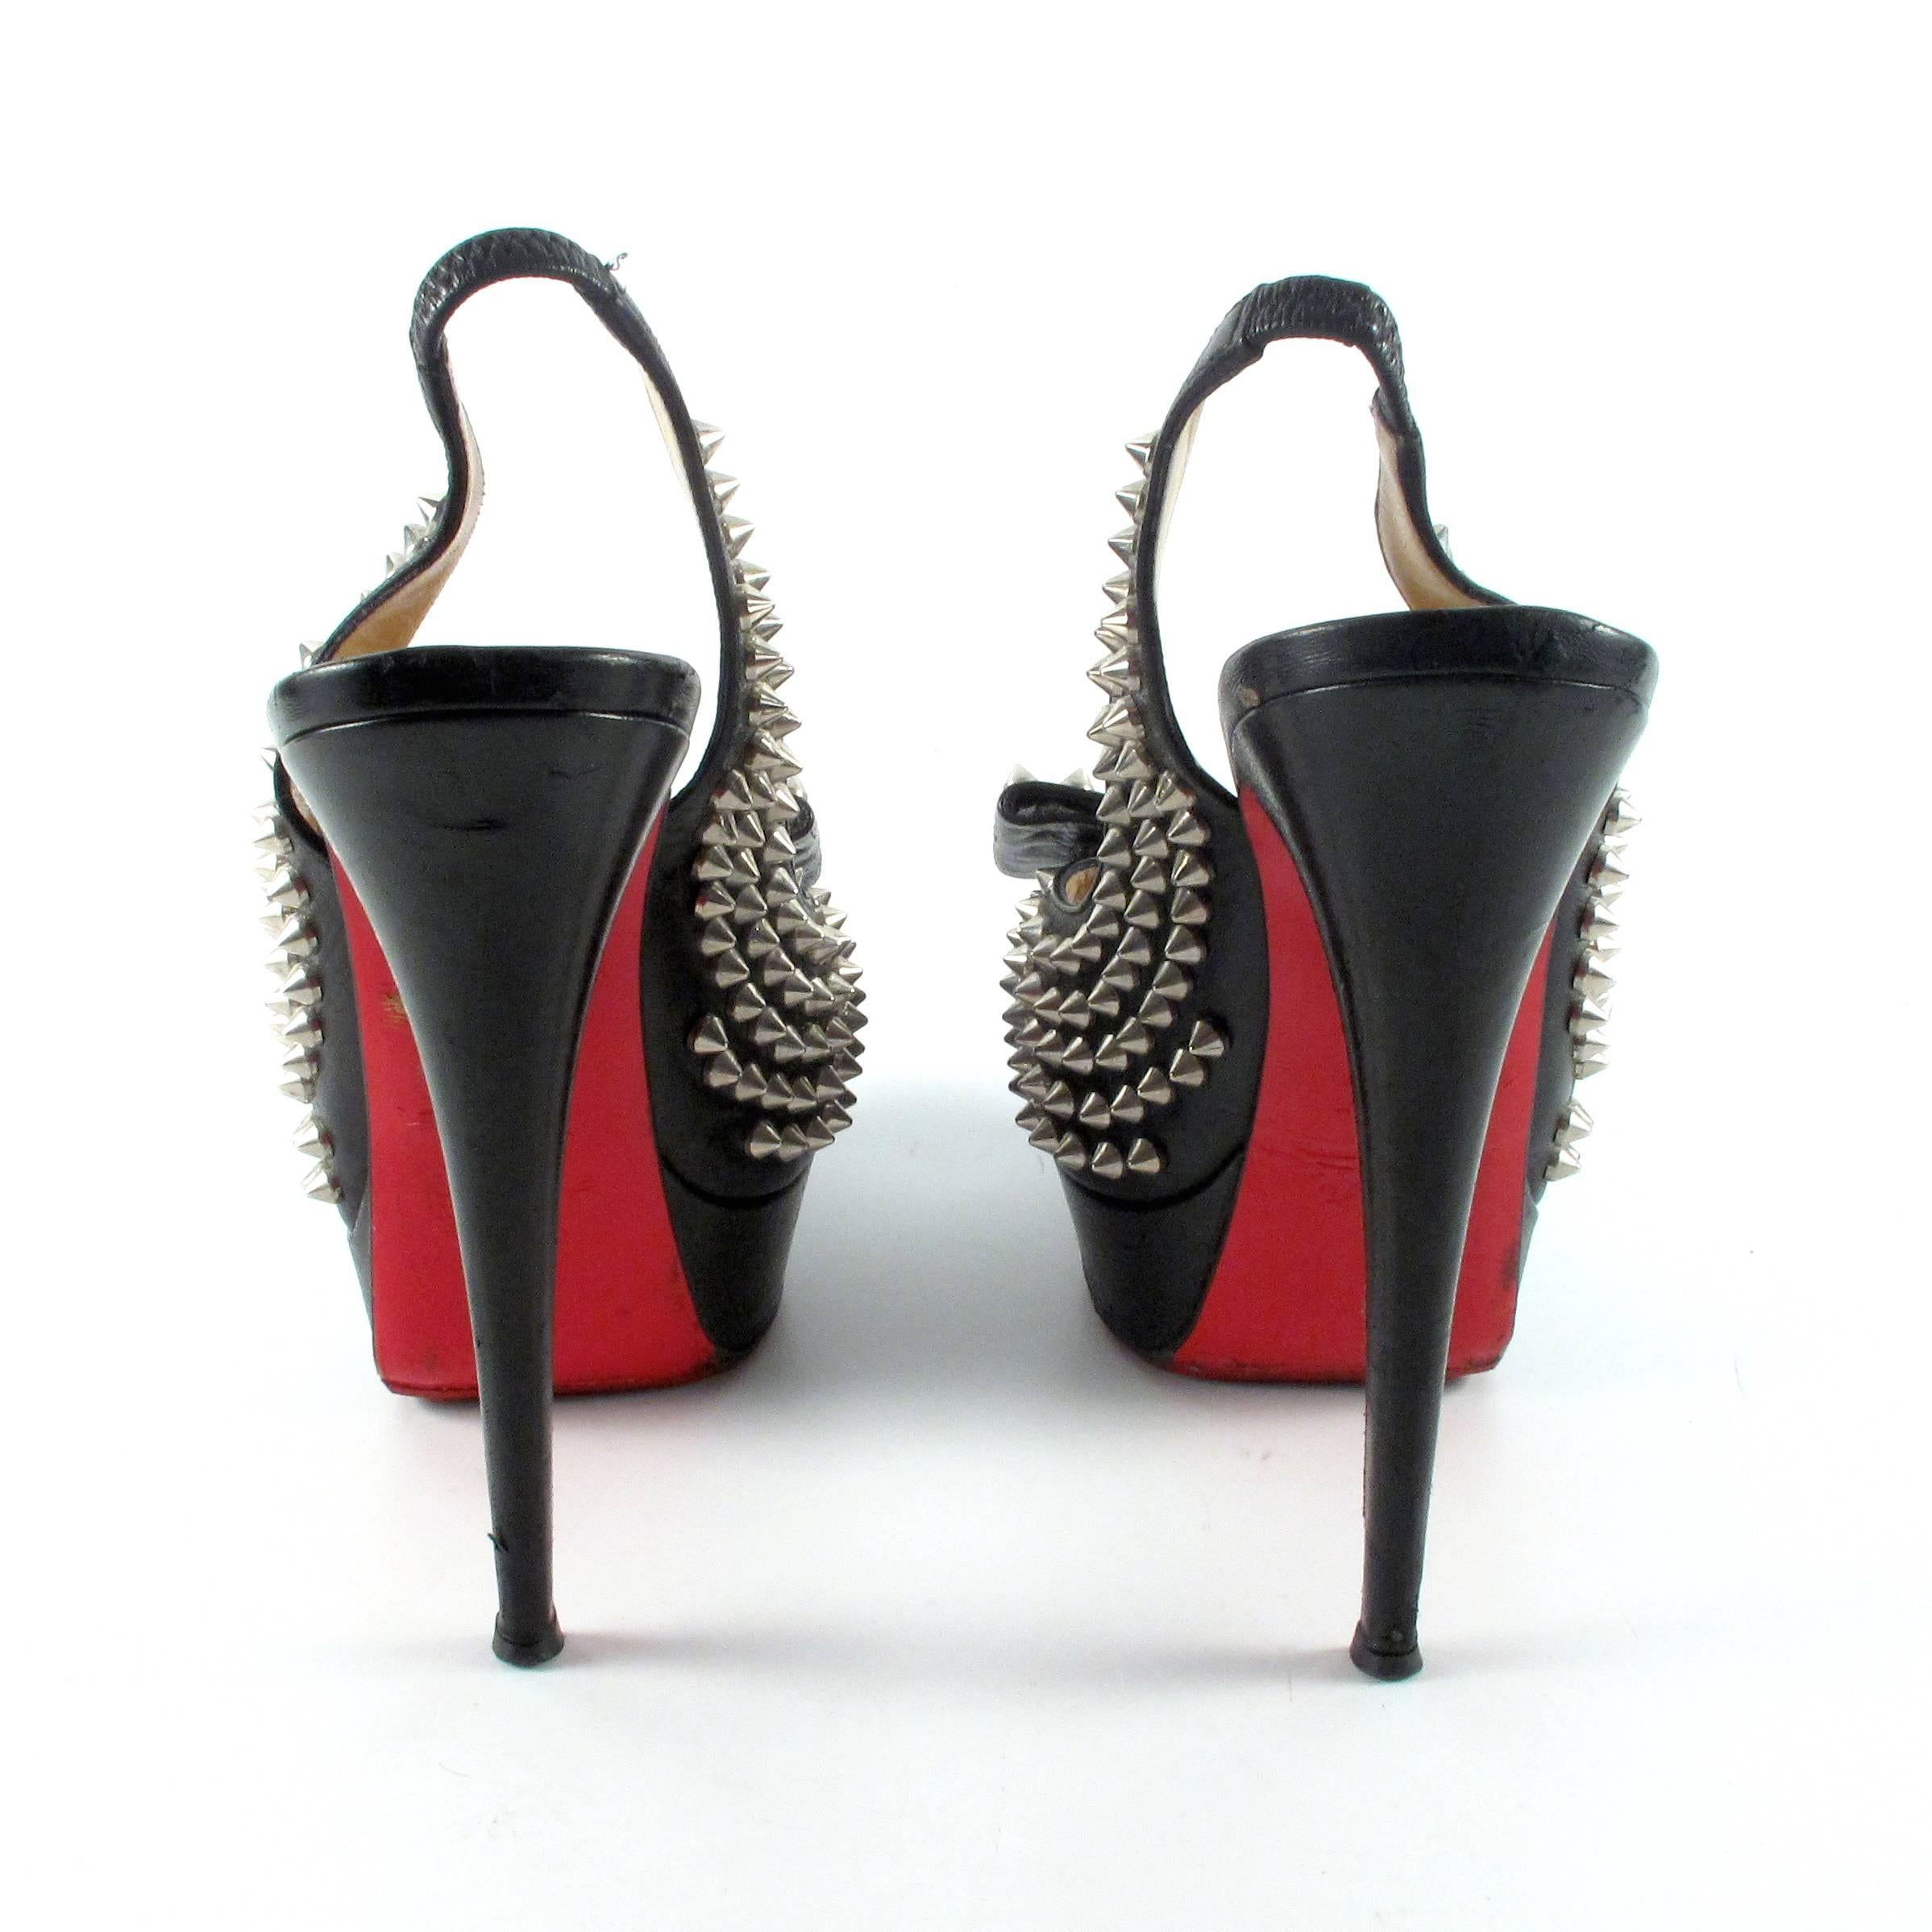 Women's Christian Louboutin Heels - 9 - 39 - Black Leather Studded Bow Clou Noued Pumps